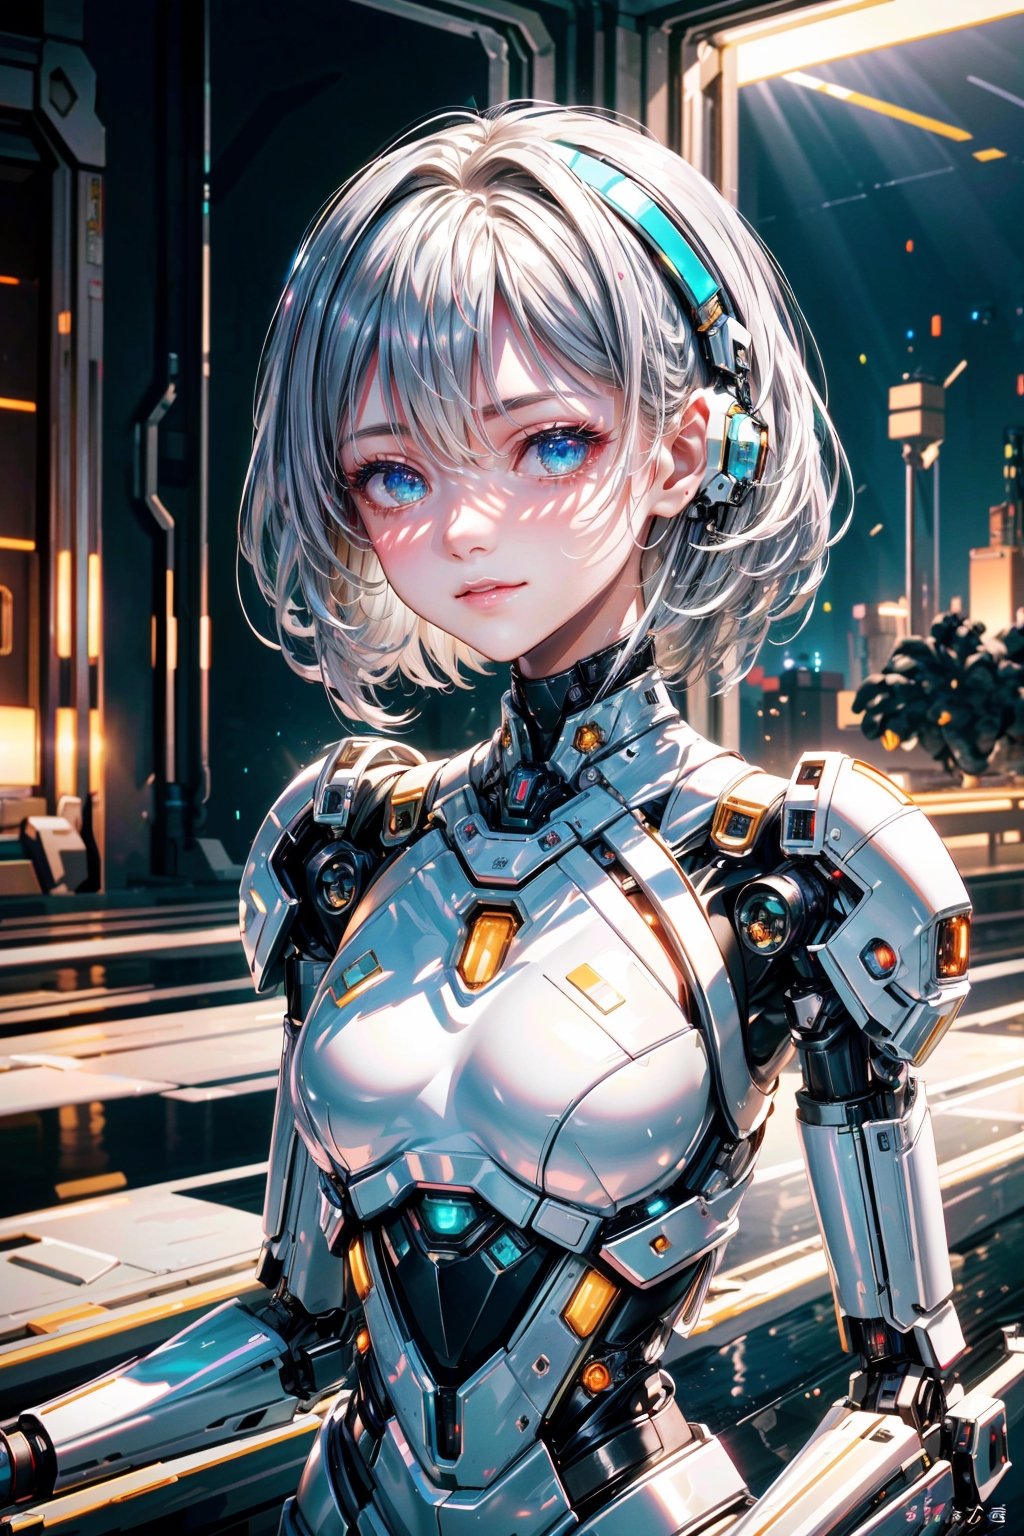 ((high resolution)), ((8K)), ((incredibly absurdres)), break. ((One android girl with happy smile)), break. ((sliver hair:1.5)), ((upper body:1.5)), ((looking at camera:1.2)), break. ((in the cyberstyle city)), ((slender boby)), ((intricate internal structure)), ((brighten parts:1.5)), break. ((extremely detailed mecha suit:1.2)), break. (robotic arms), (robotic legs), (robotic hands), ((robotic joint:1.2)), break. Cinematic angle, ultra fine quality, masterpiece, best quality, incredibly absurdres, fhighly detailed, sharp focus, (photon mapping, radiosity, physically-based rendering, automatic white balance), masterpiece, best quality, Mecha body, furure_urban, incredibly absurdres,masterpiece,best quality